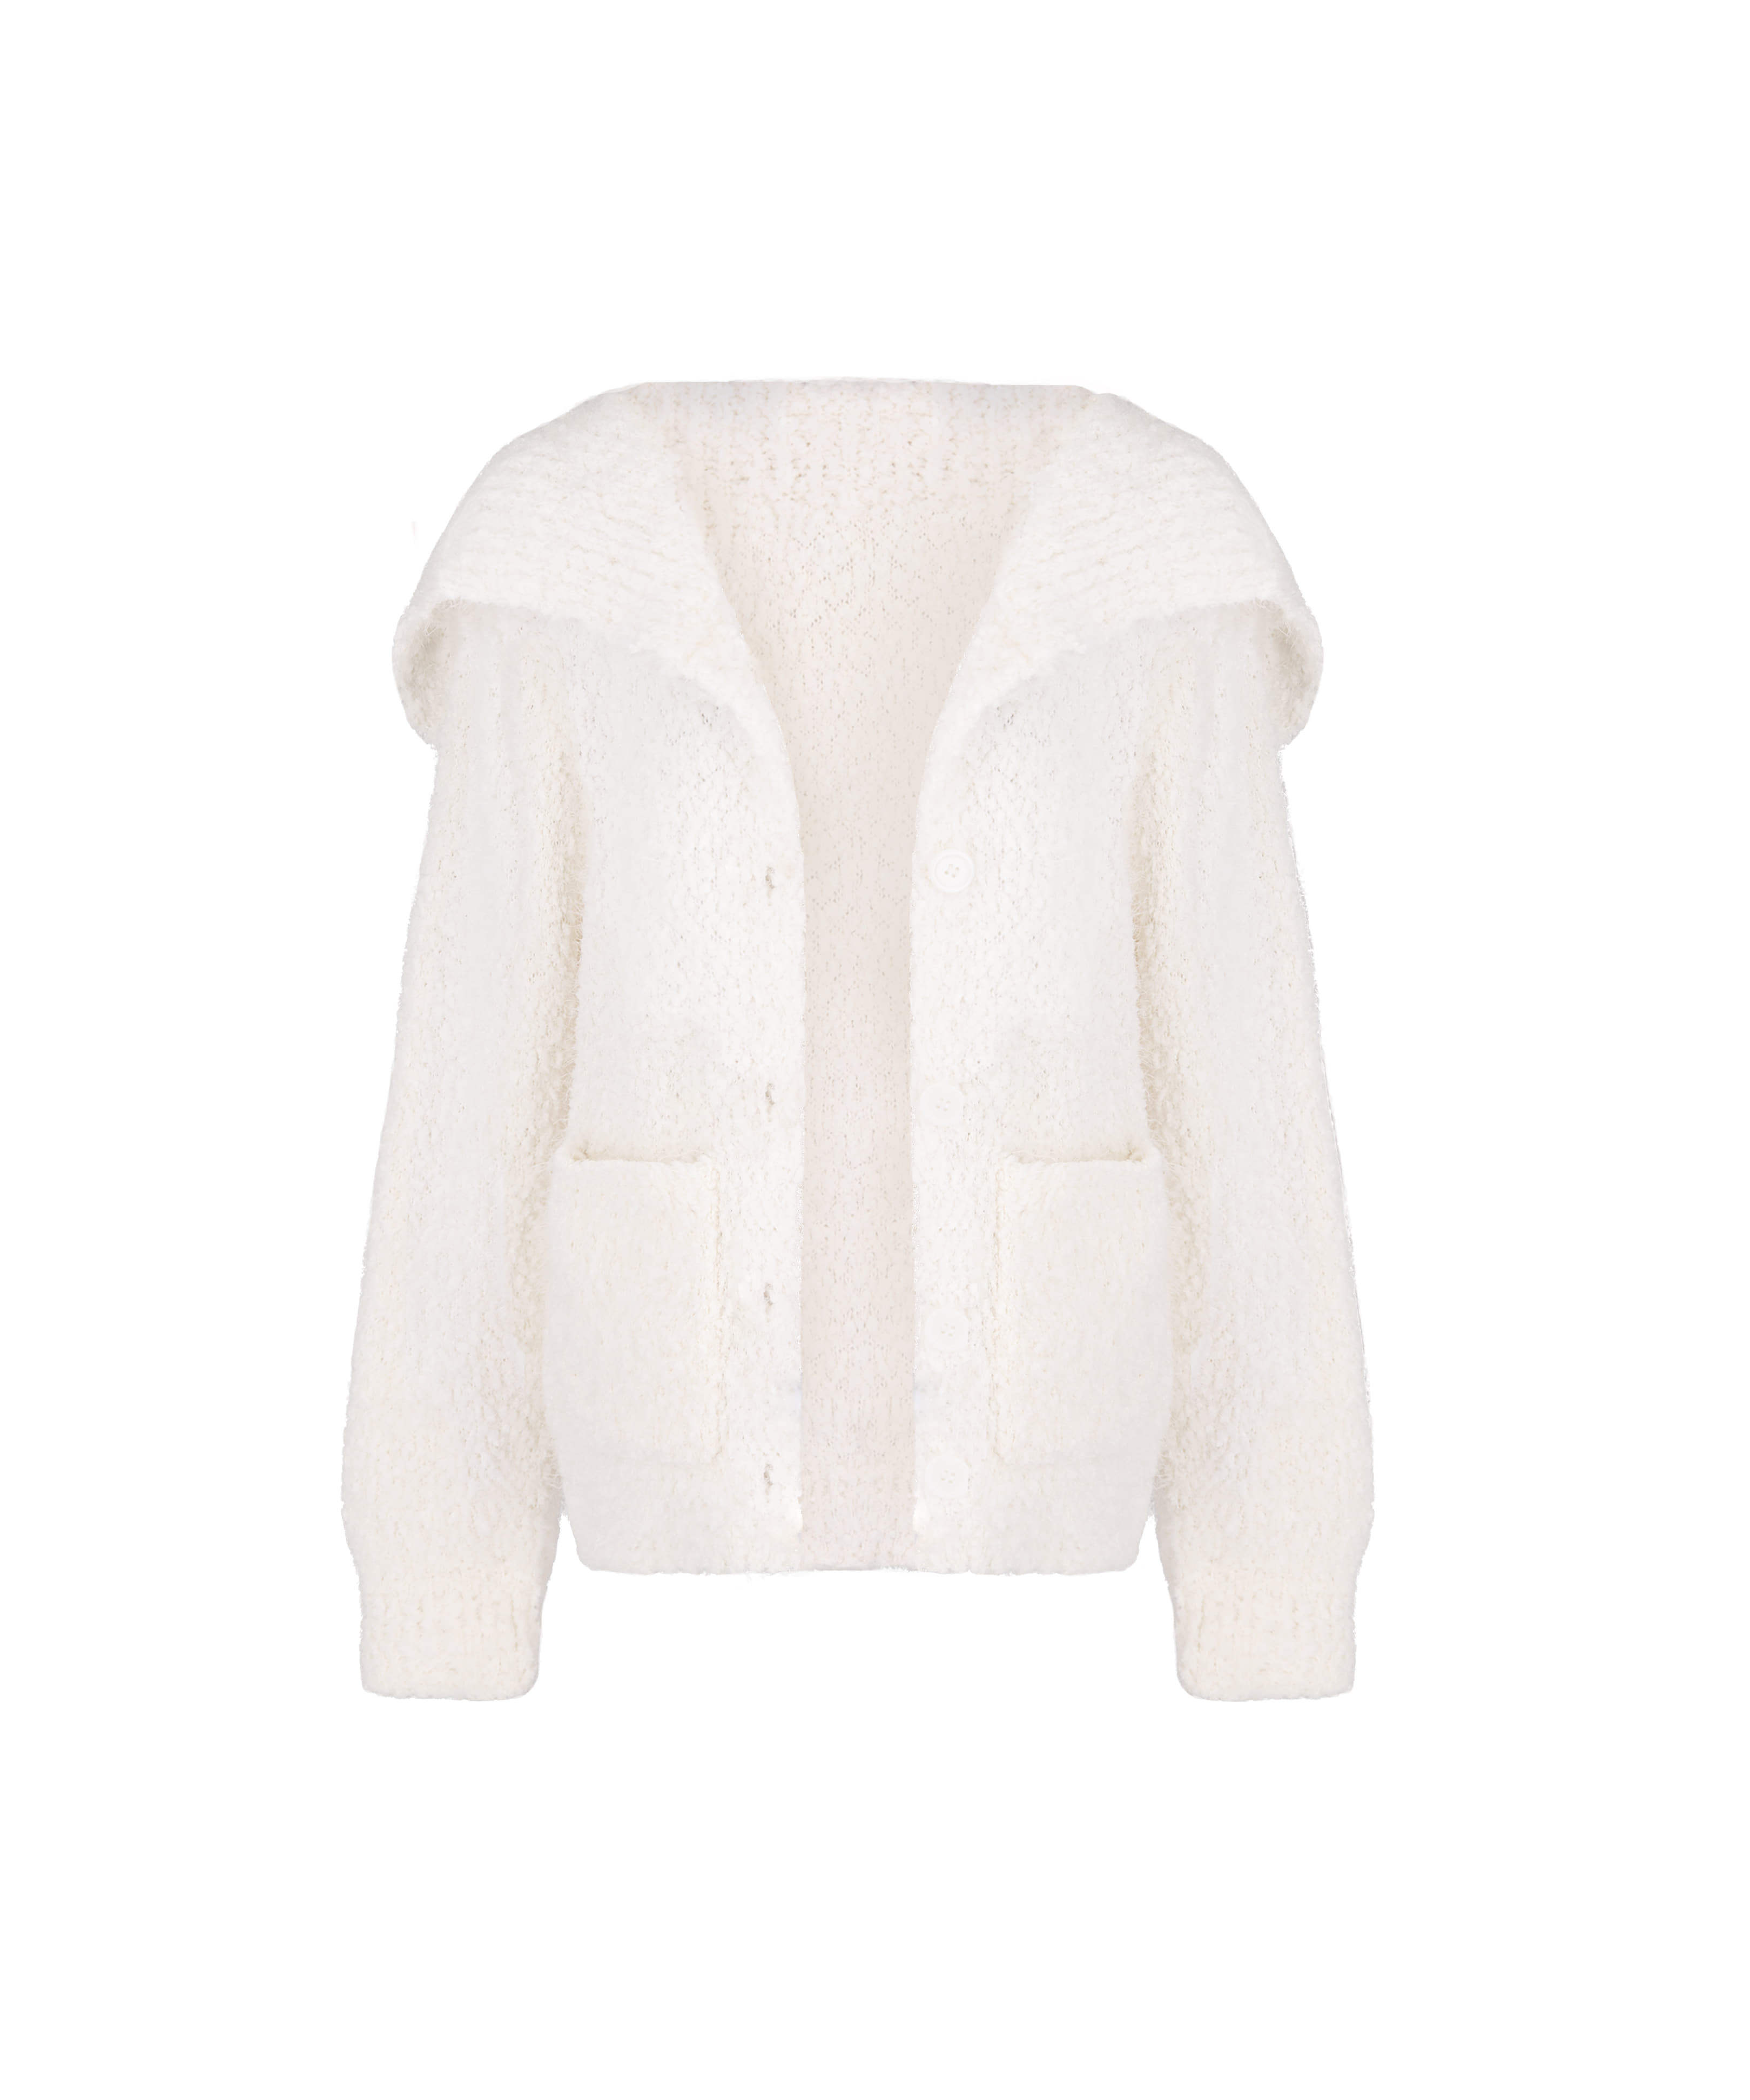 [Exclusive] Snowy knit cardigan